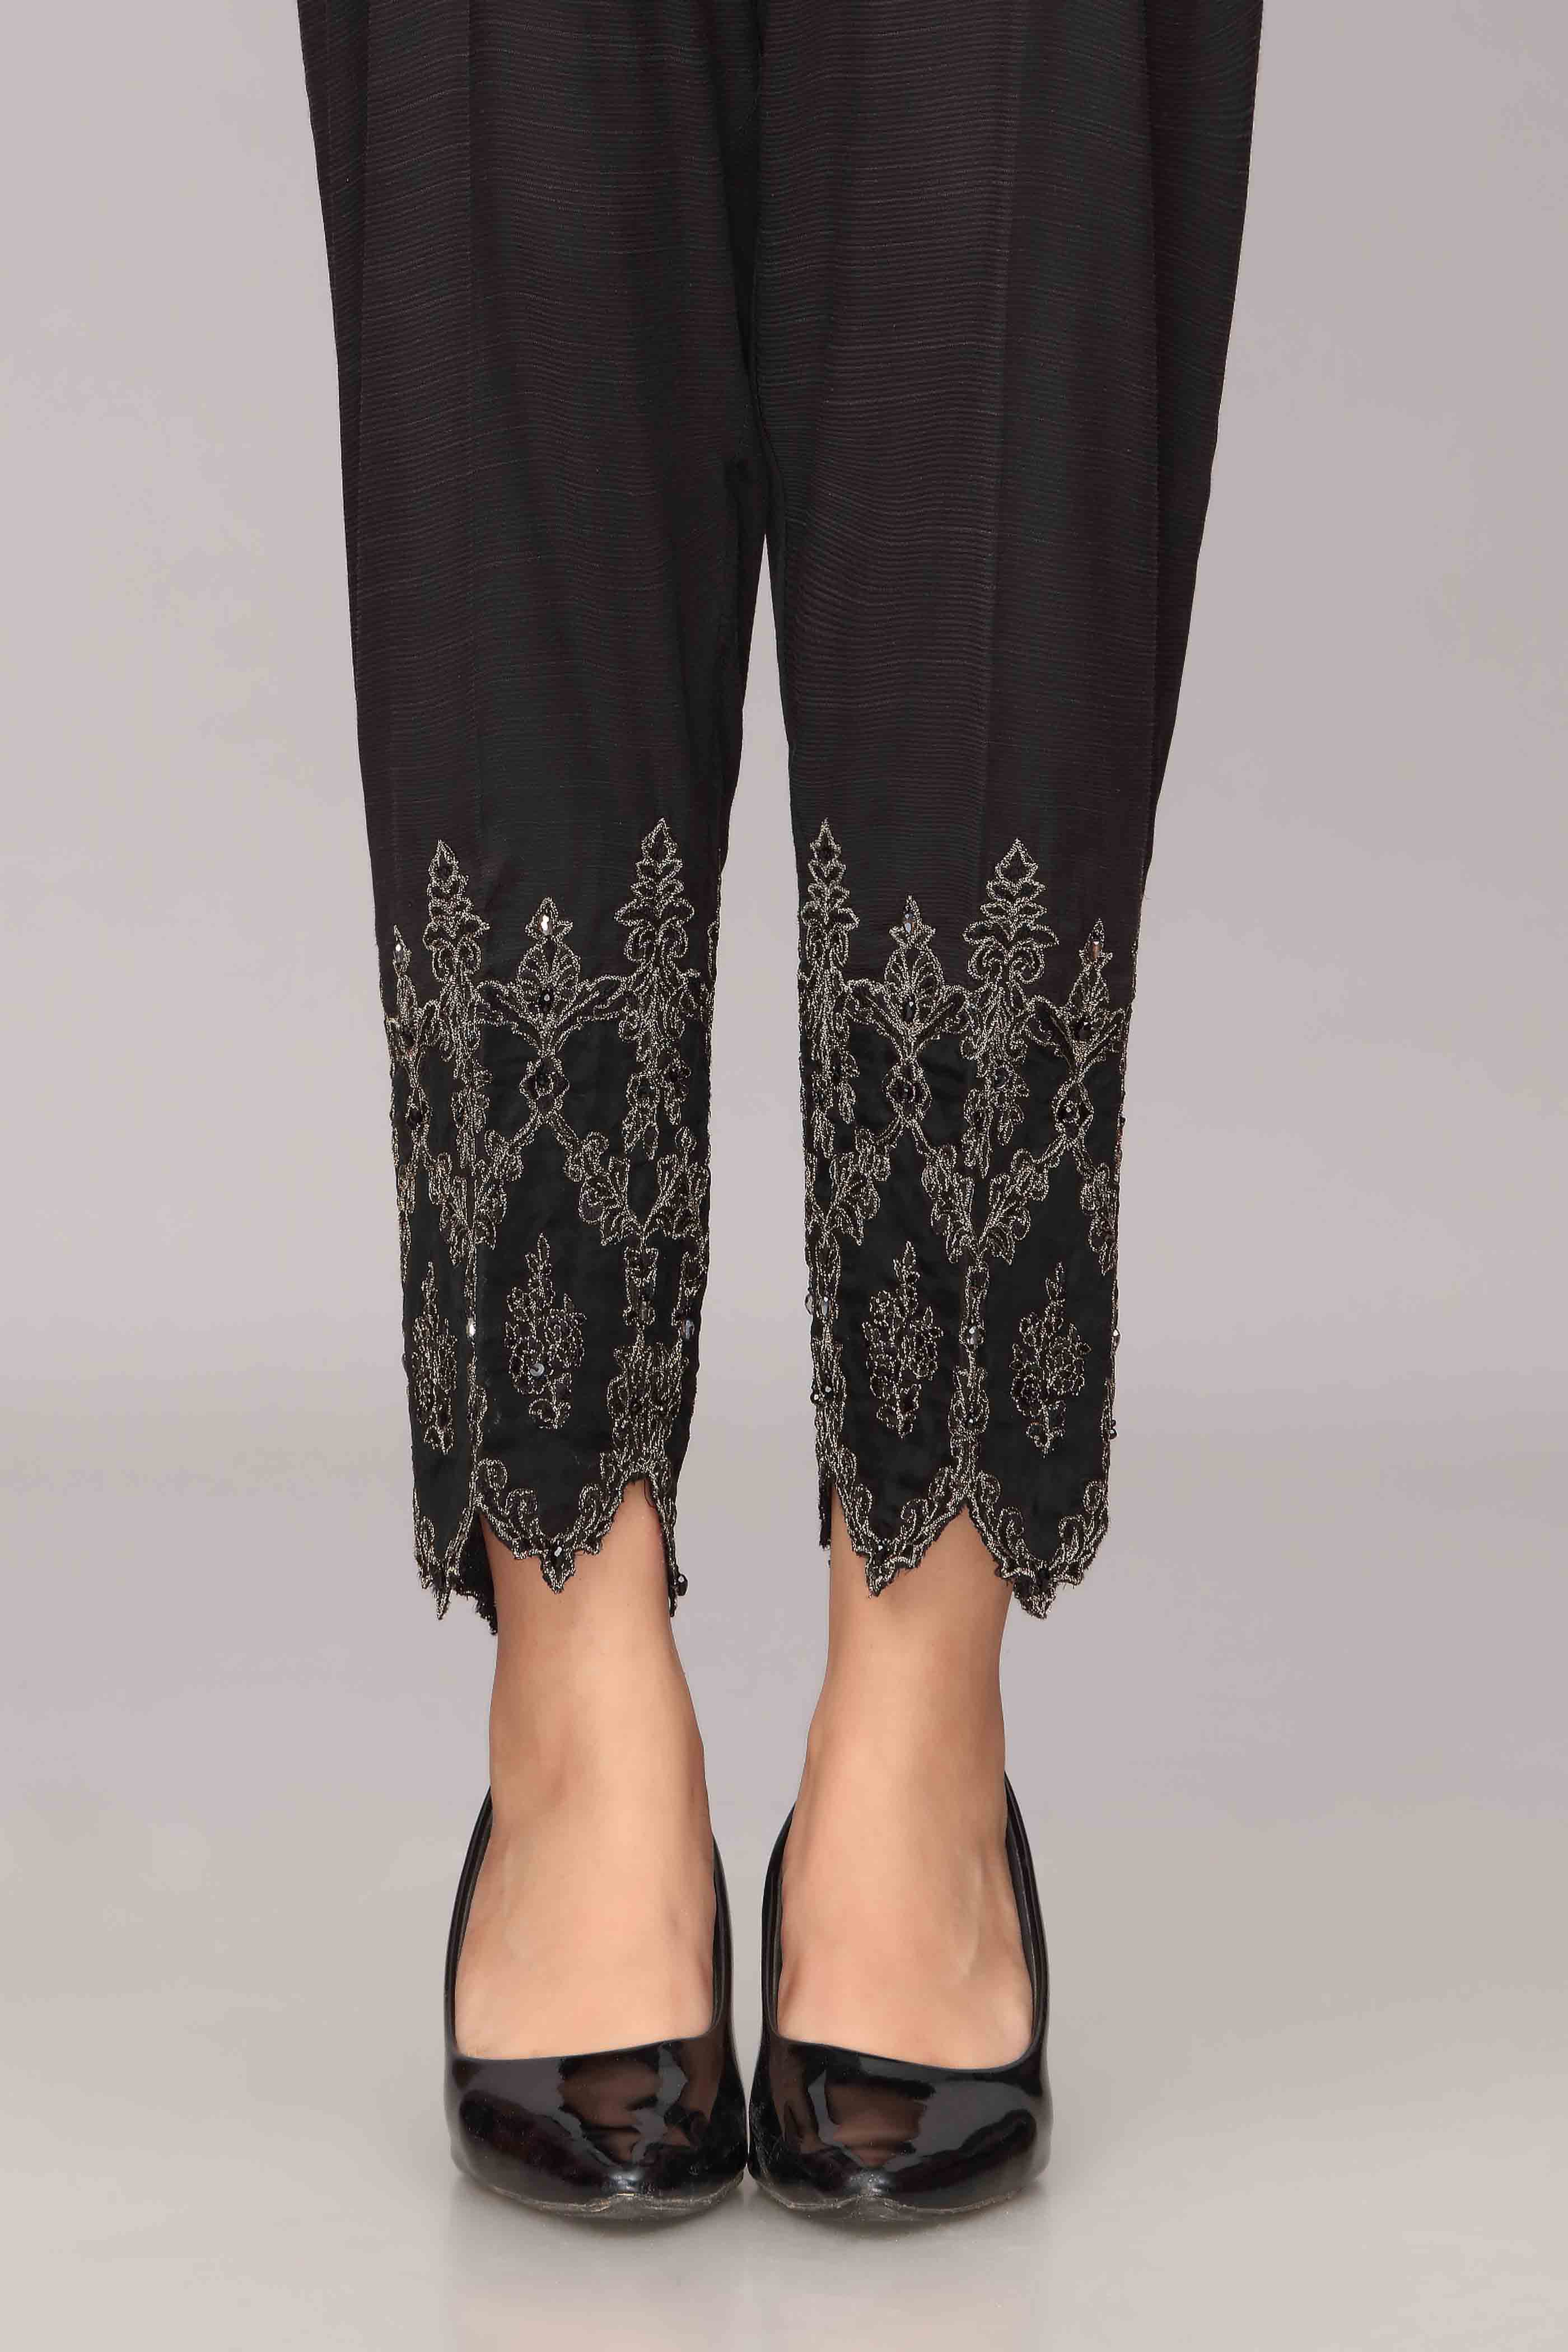 Trousers for Women - Try this 15 Latest Collection for Trending Look